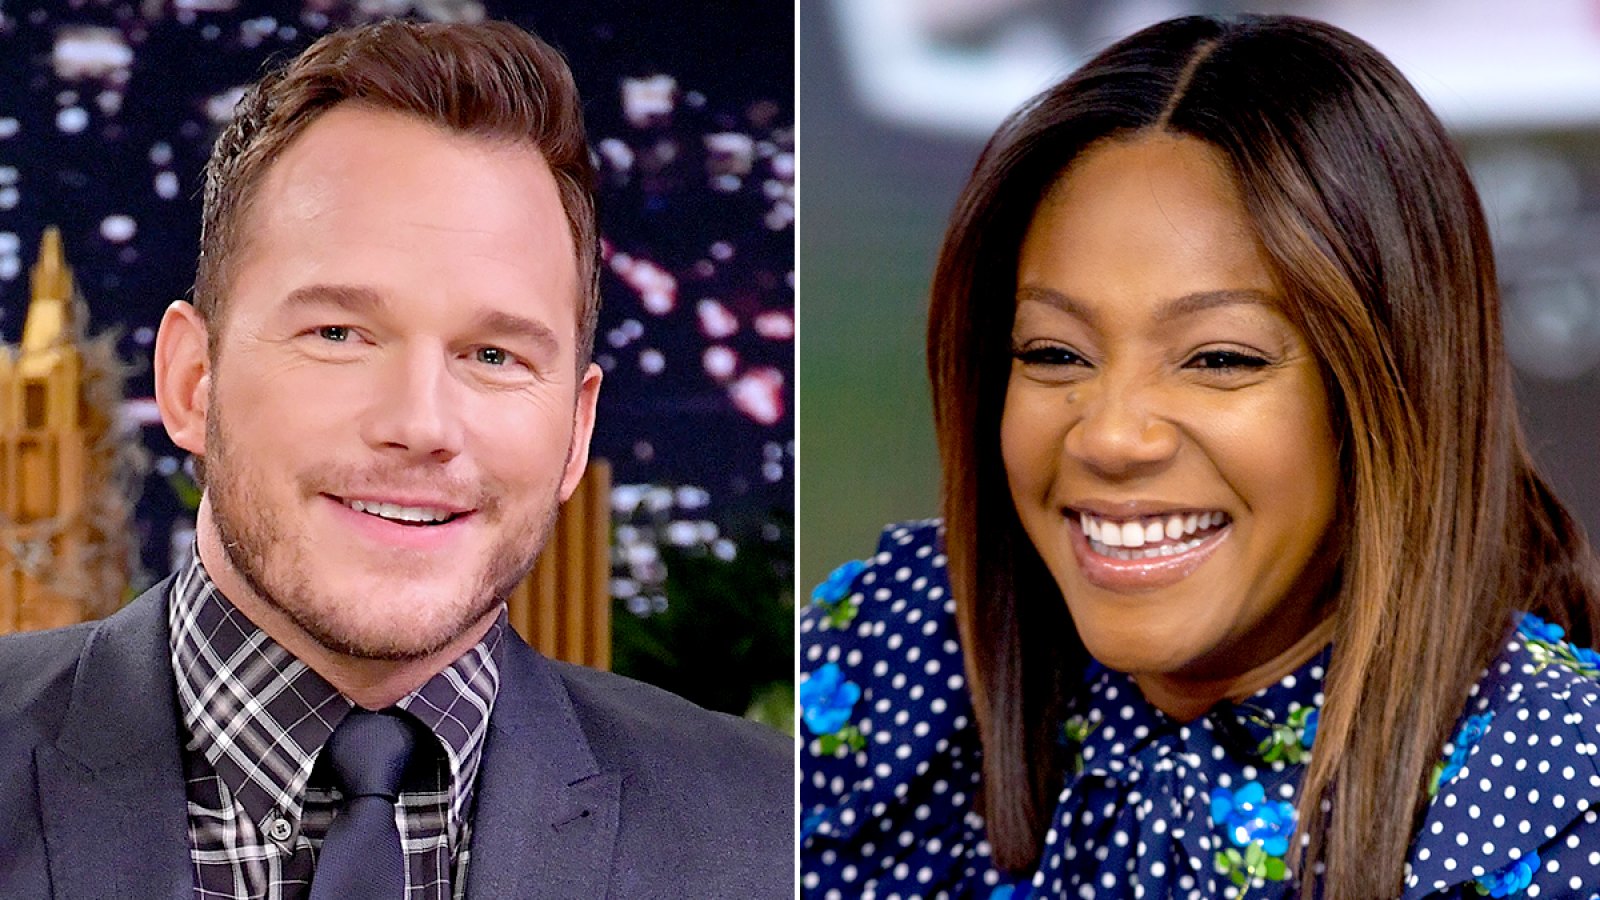 Chris-Pratt,-Tiffany-Haddish-to-Give-Out-Coffee-at-Lego-Cafe